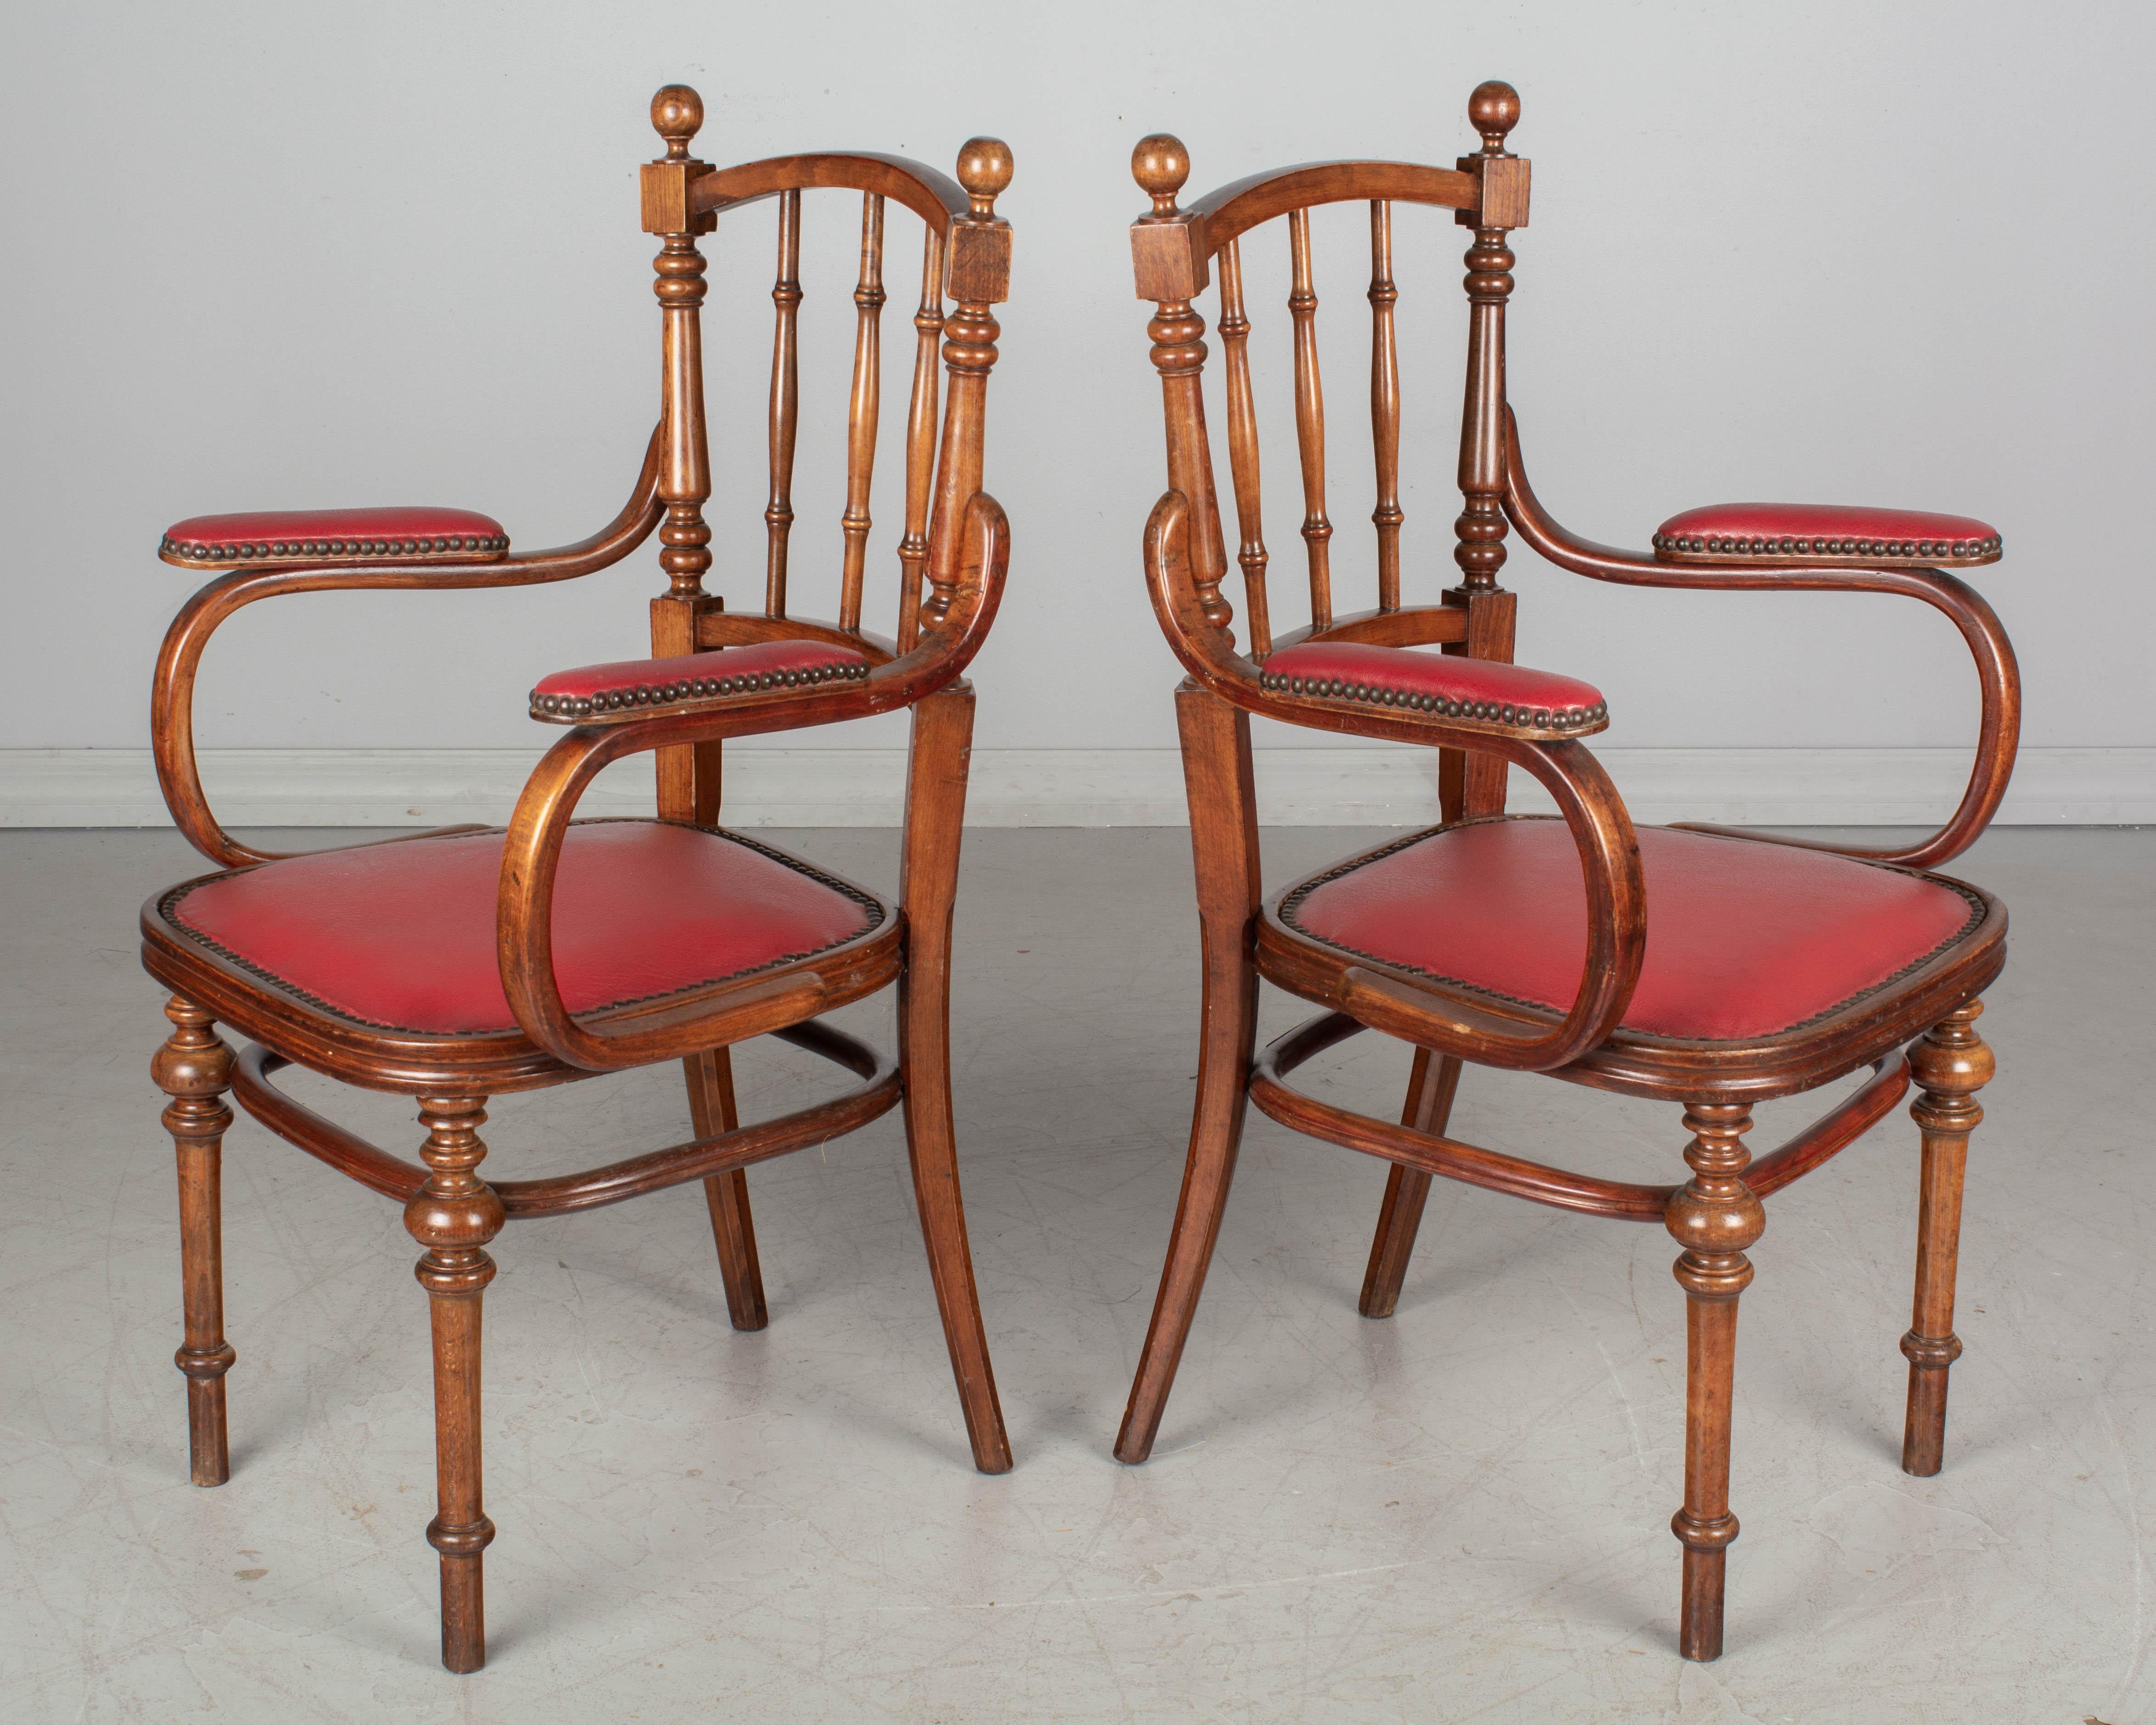 A pair of French Thonet style bentwood armchairs made of beechwood with turned legs and spindle back. Original red vinyl seat and armrests with nailhead trim.